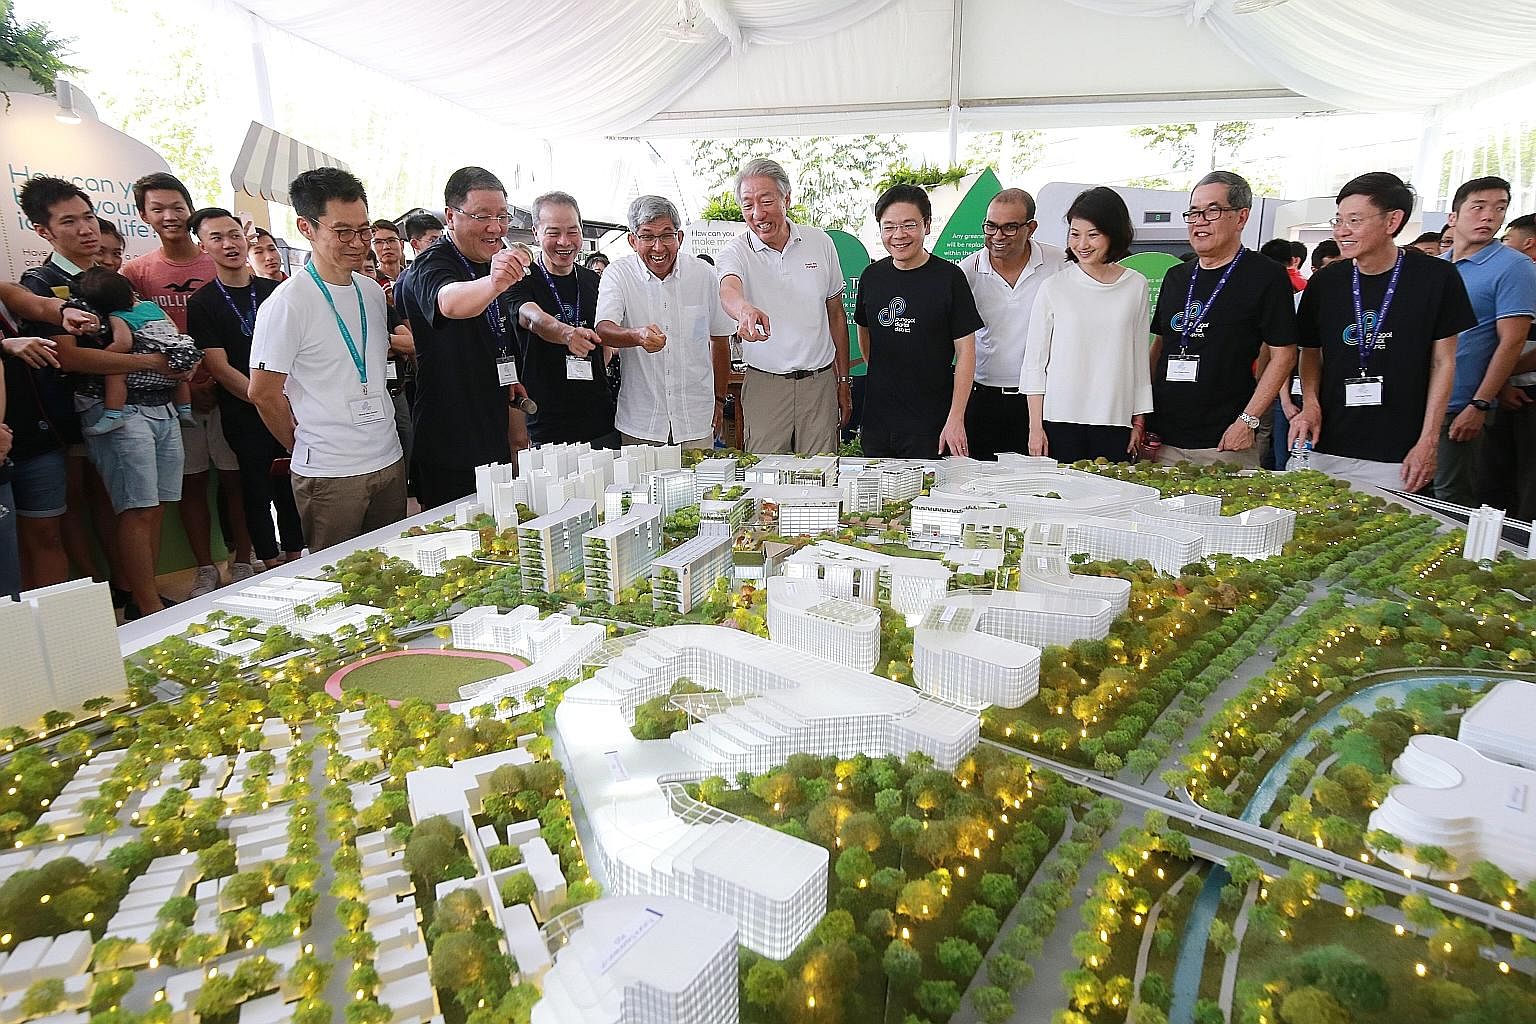 Construction of Jewel Changi Airport. To future-proof Singapore against competition and increase the chances of attracting investments, the Government is betting big by embarking on billion-dollar projects.